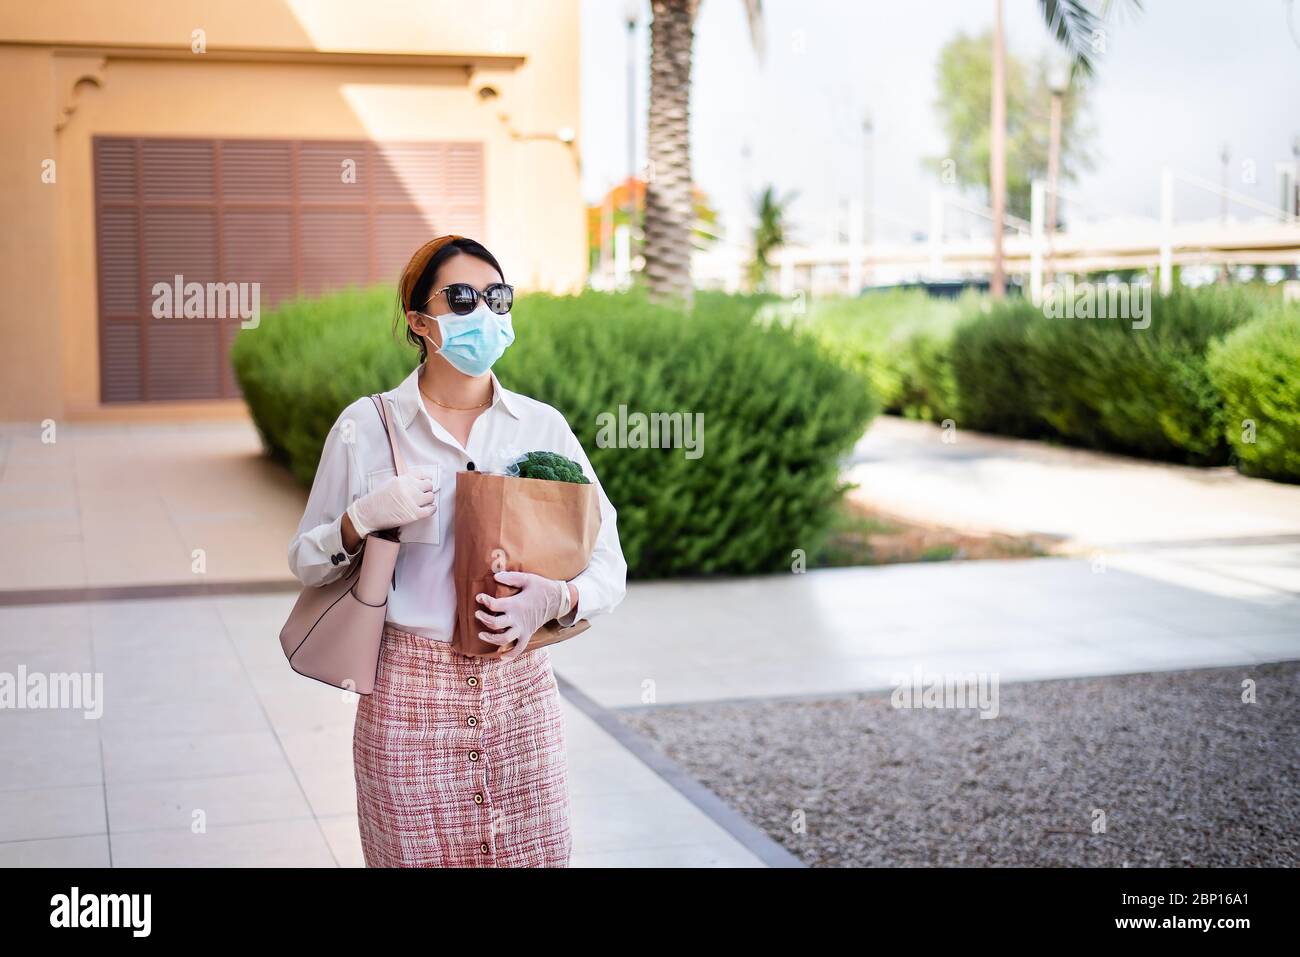 Asian woman carrying shopping bag with groceries while wearing mask and gloves to prevent virus spread during coronavirus pandemic Stock Photo